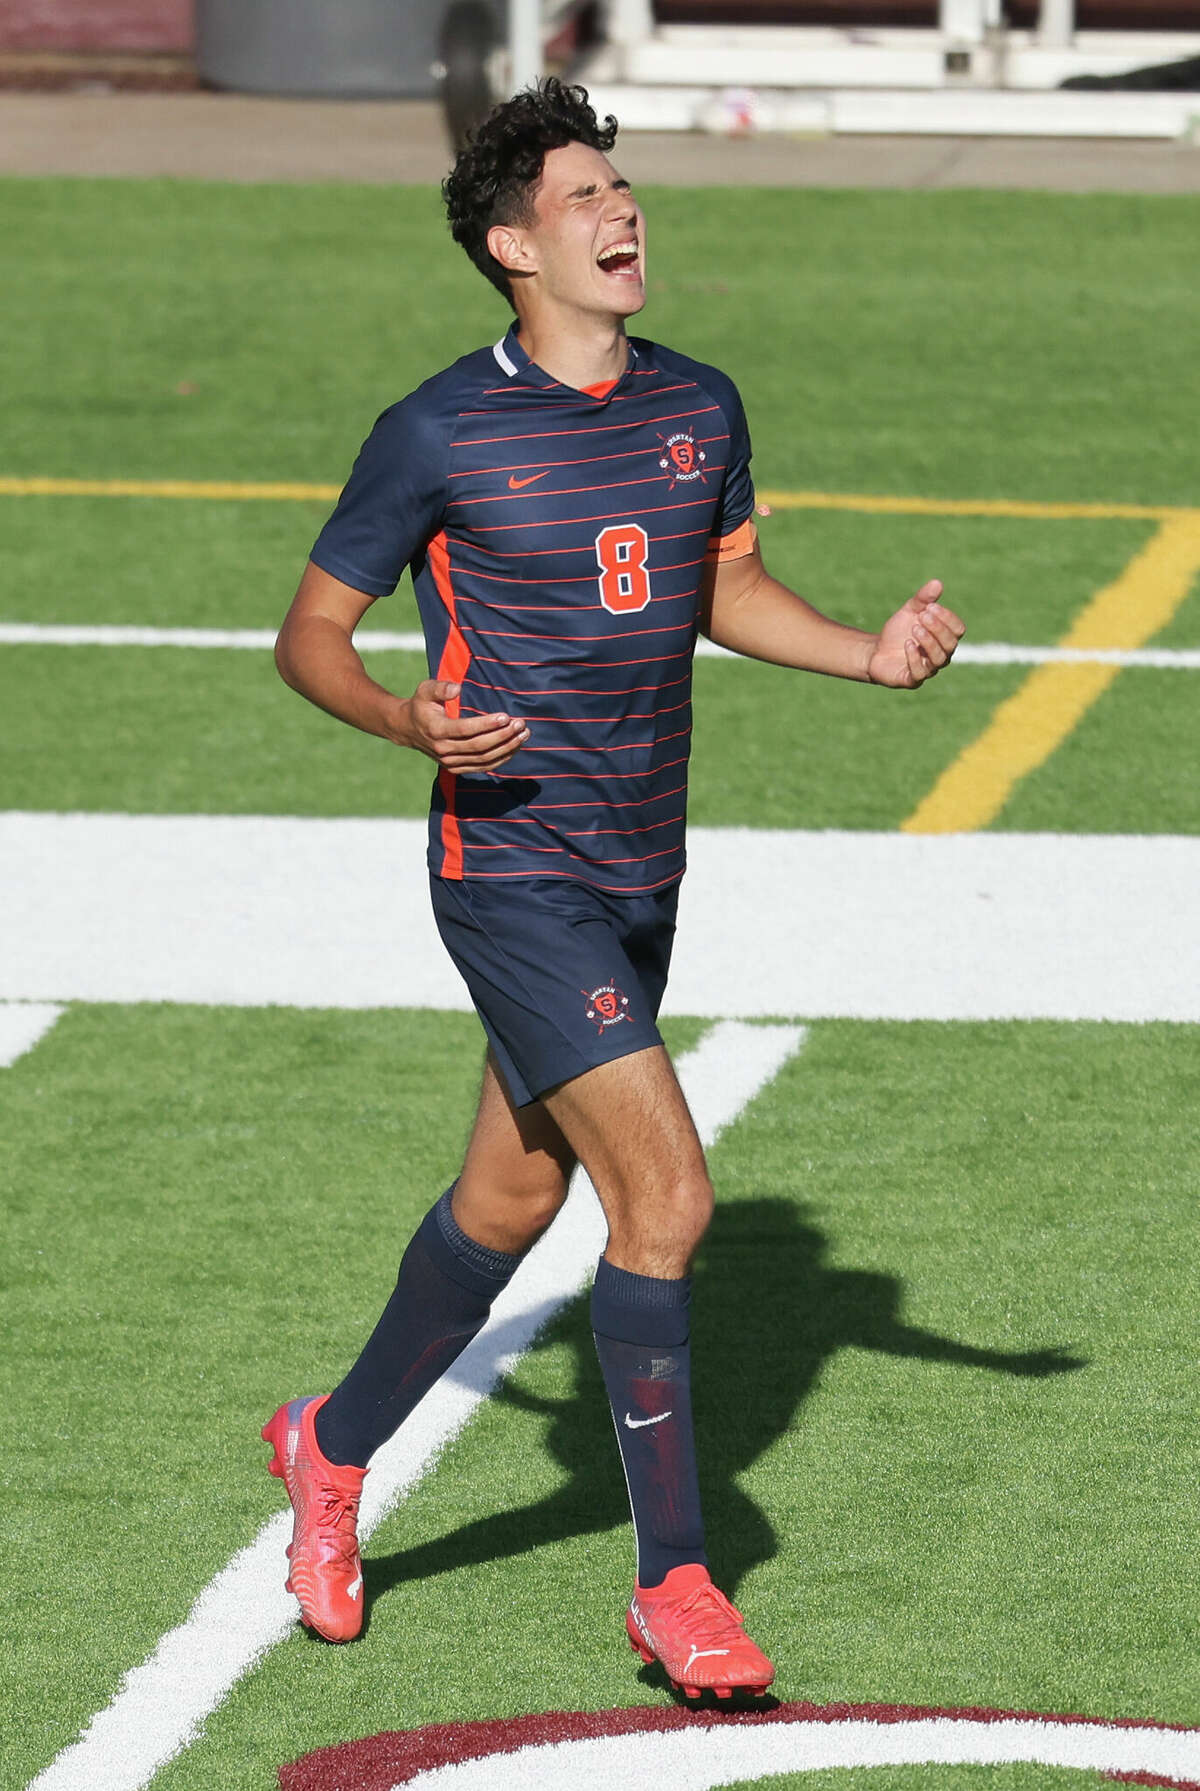 Seven Lakes Spartan Javier Rivas (8) celebrates scoring the game winning goal in overtime against the the Cypress Creek Cougars in a Region III-6A boys finals playoff soccer game on April 9, 2022 at Abshire Stadium in Deer Park, TX.